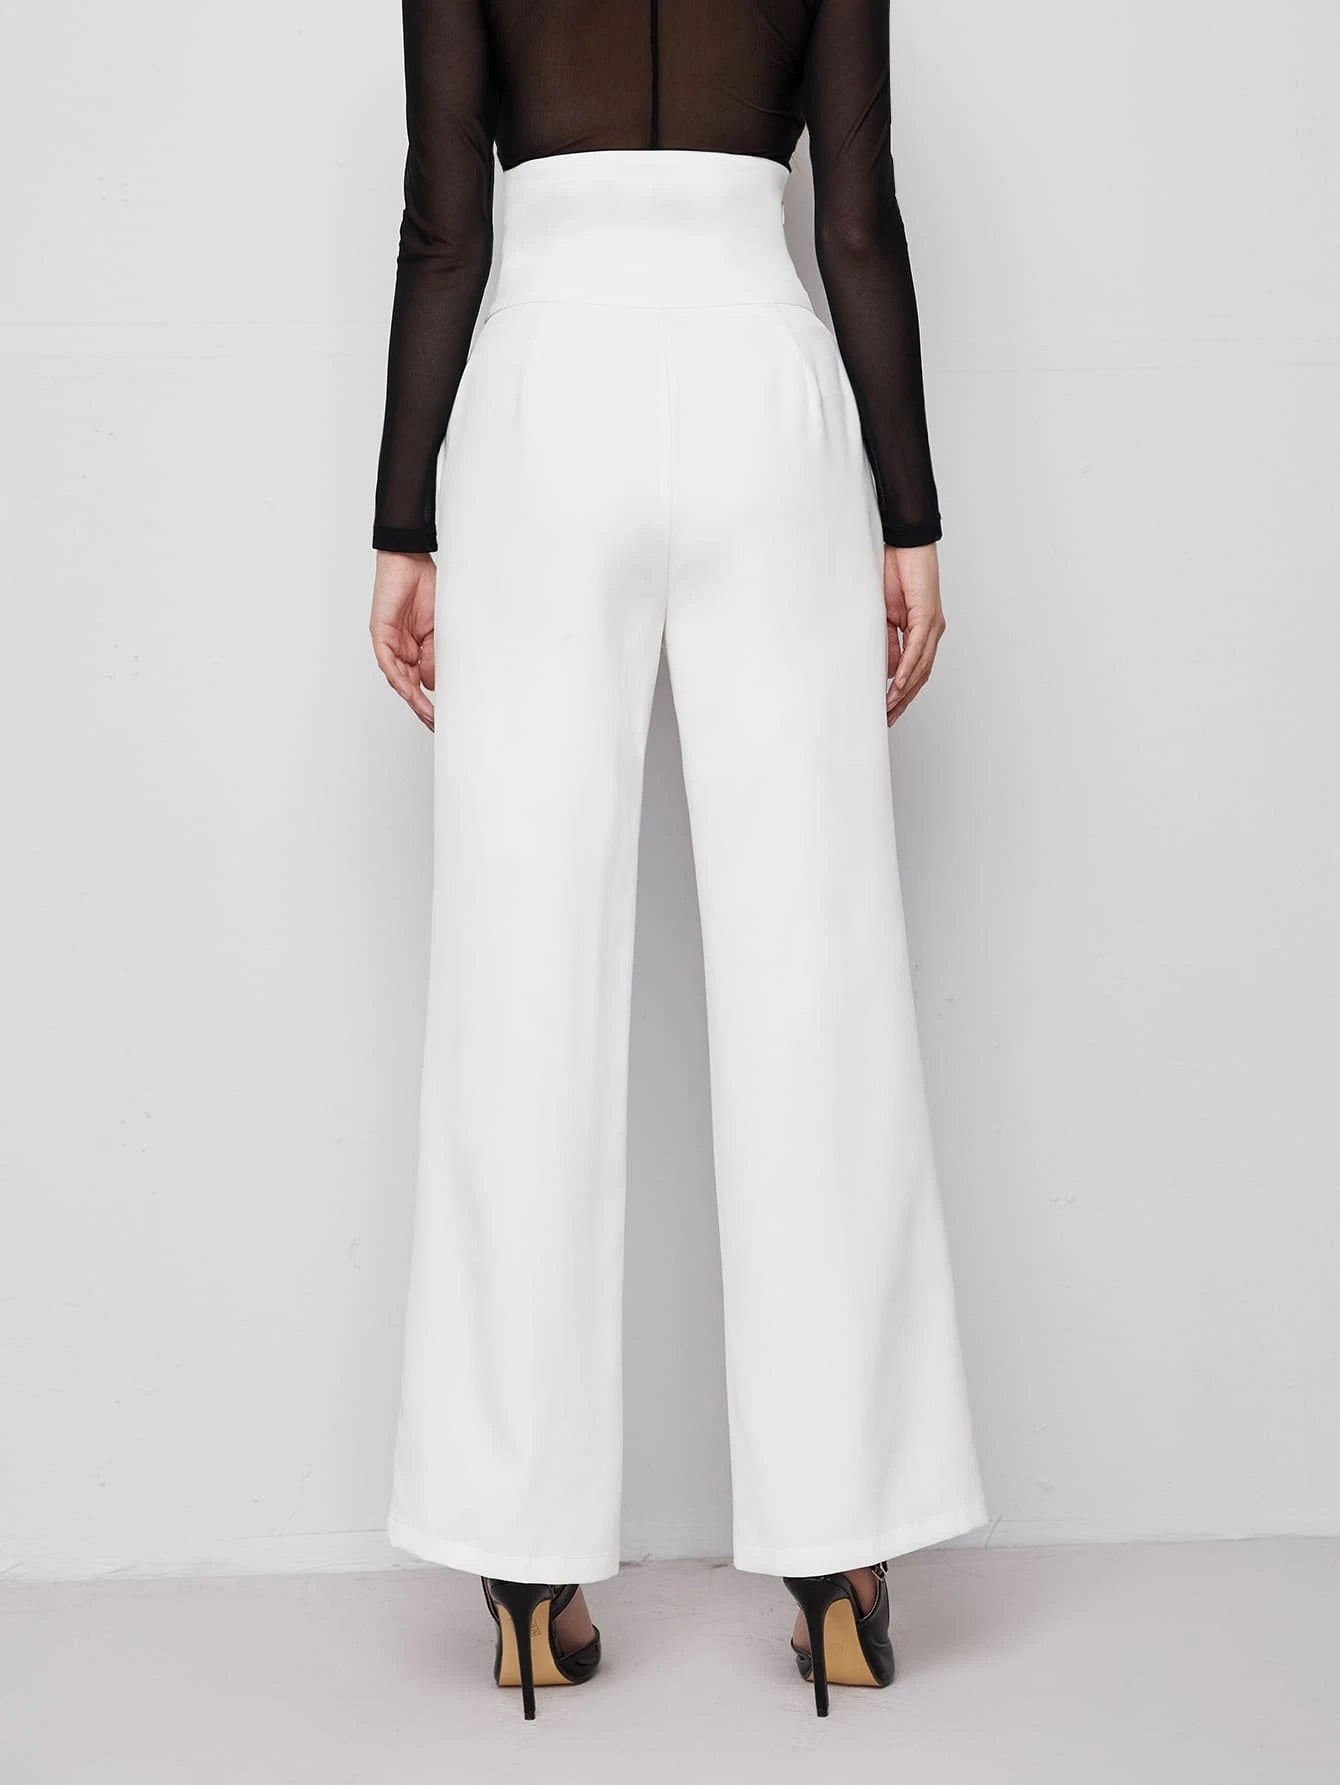 CM-BS125410 Women Elegant Seoul Style Double Breasted Wide Waistband Pants - White